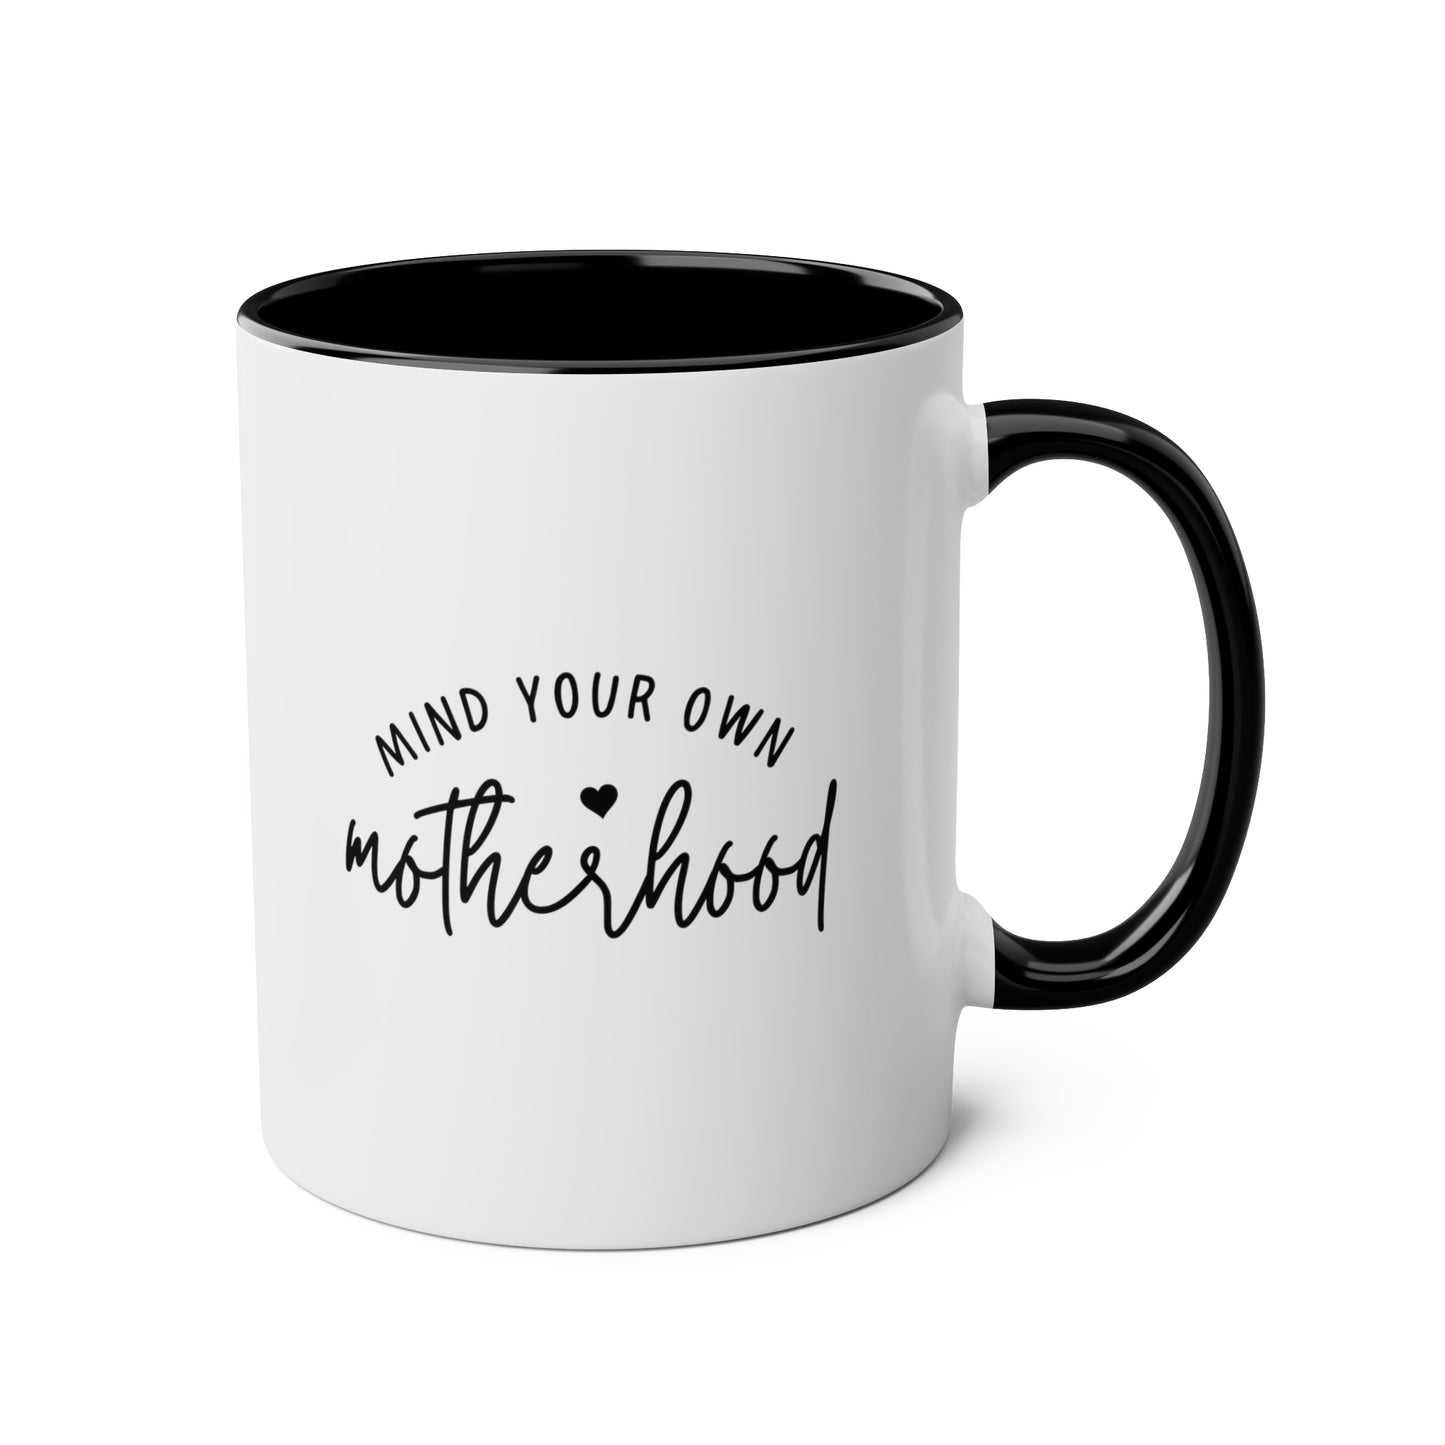 Mind Your Own Motherhood 11oz white with black accent funny large coffee mug gift for sassy new mom mother's day mama pregnancy announcement waveywares wavey wares wavywares wavy wares